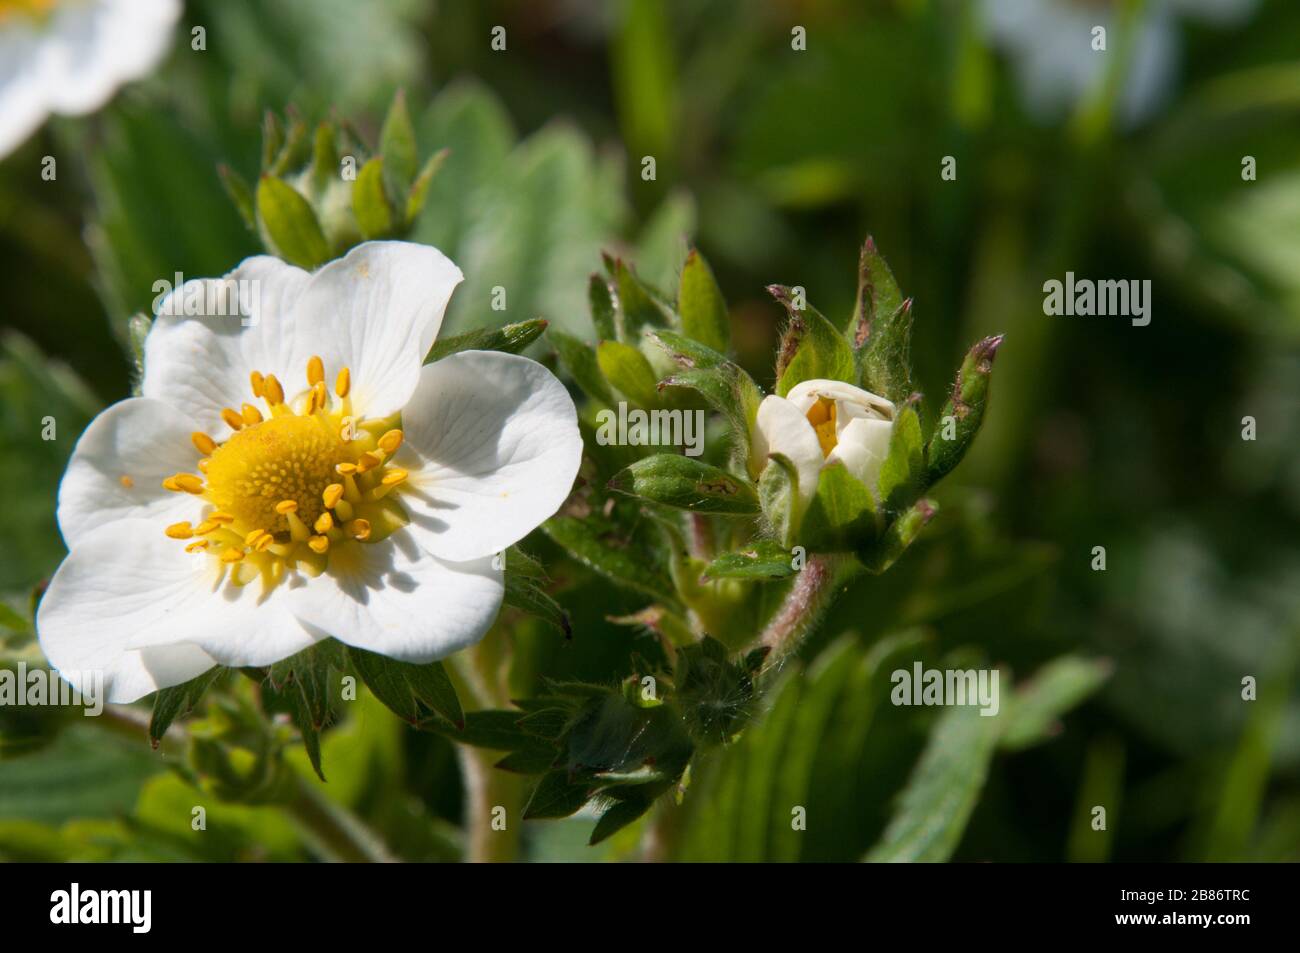 Strawberry flower with bud close-up view. Blurred background. Very spring photo. Stock Photo